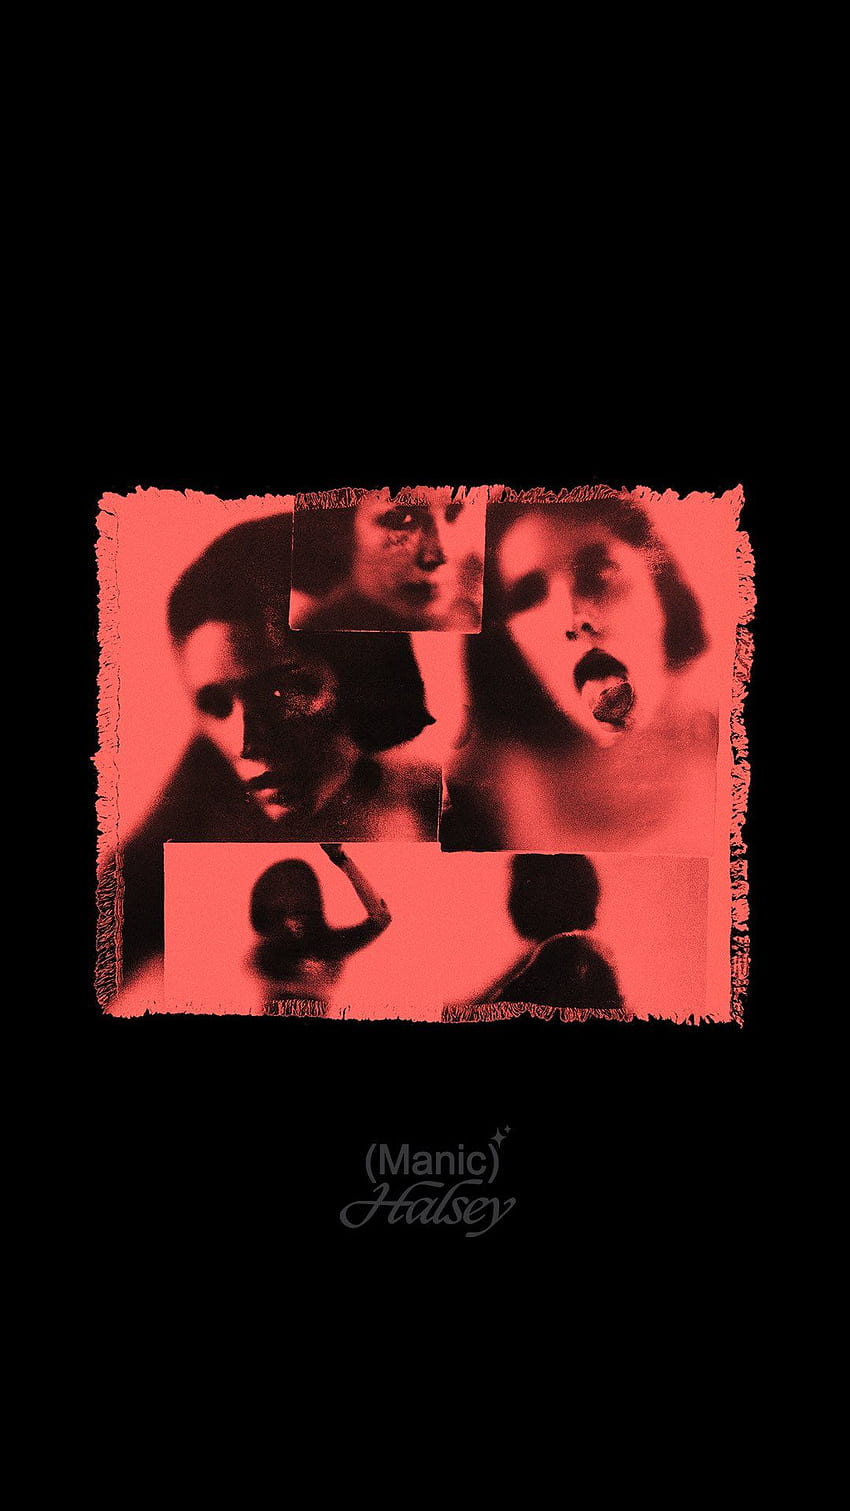 Halsey official Maniac . Halsey poster, Halsey songs, Graphic design posters, Halsey Manic HD phone wallpaper